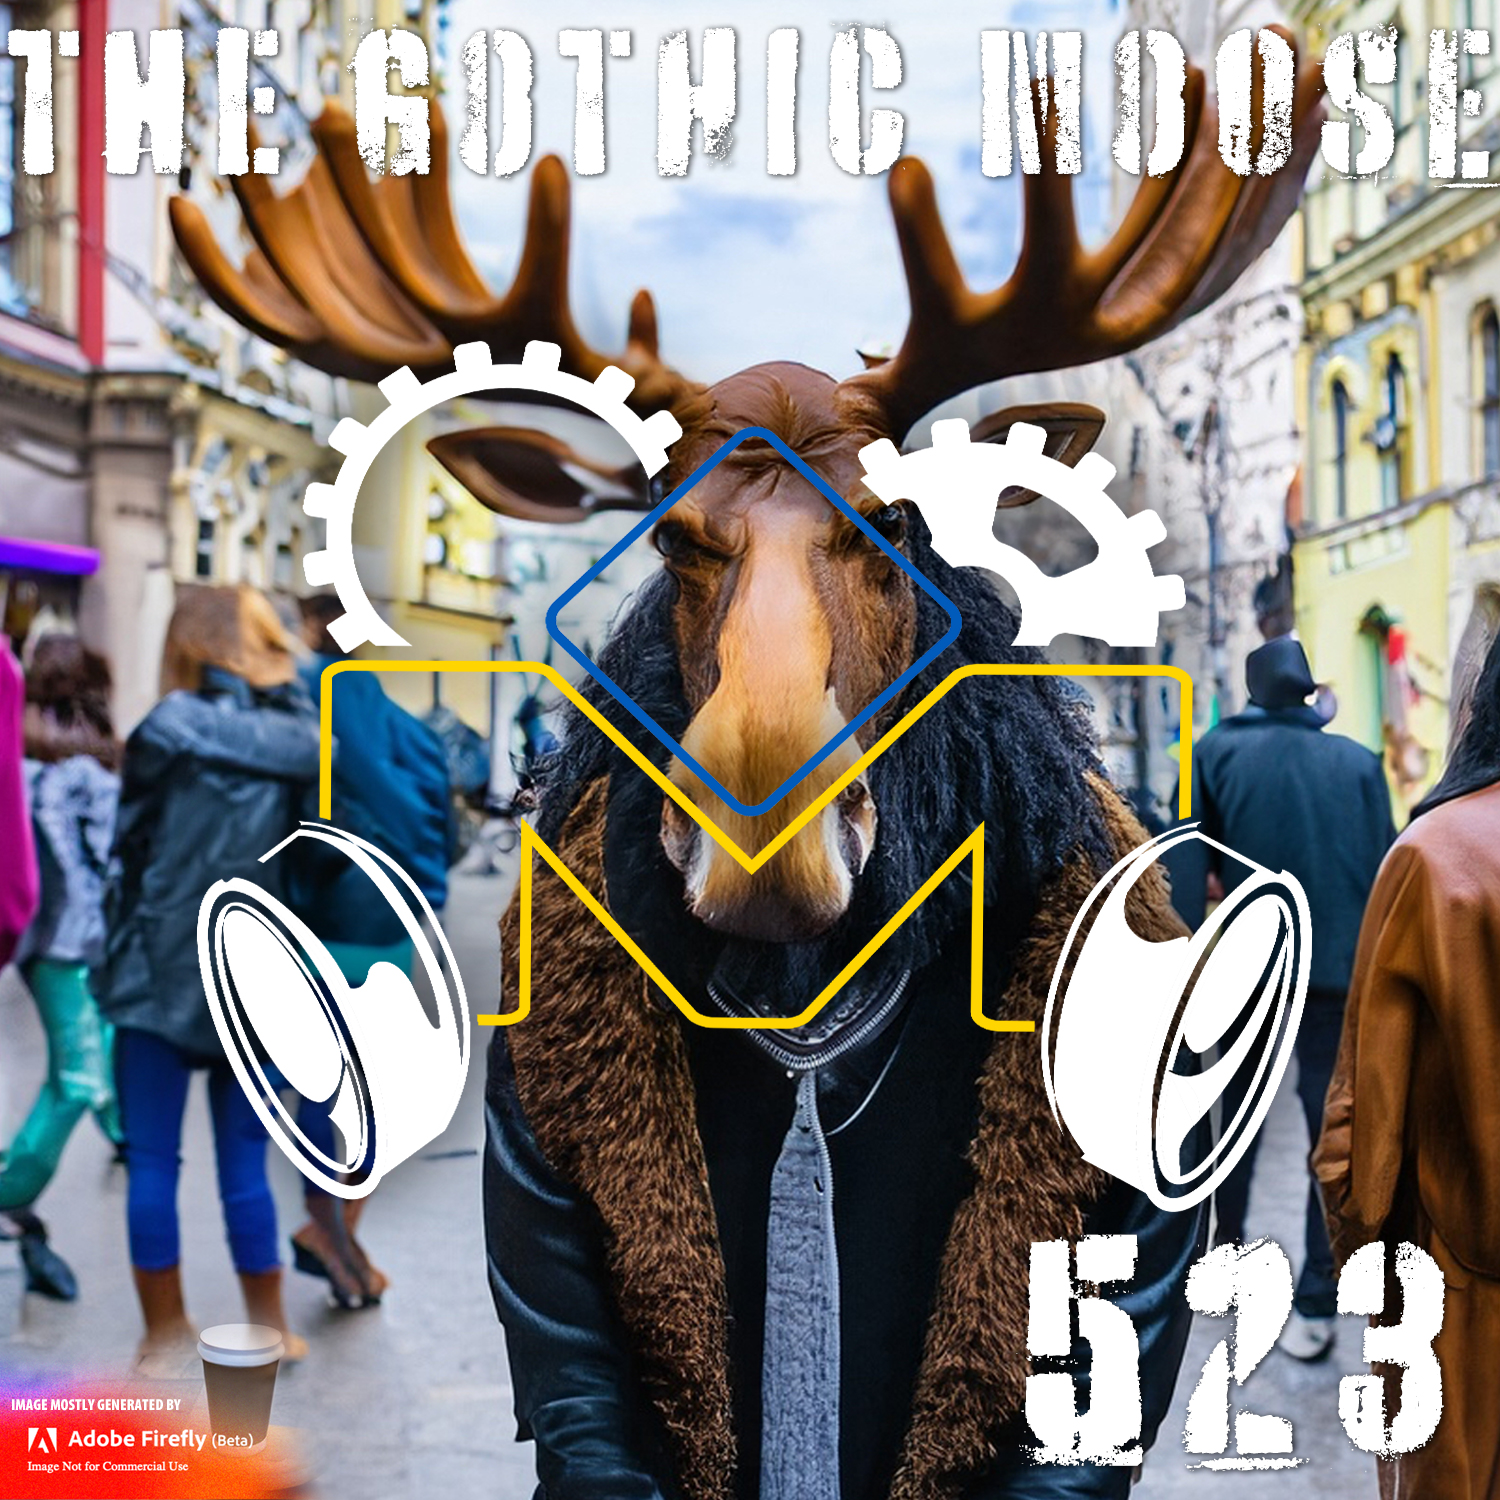 The Gothic Moose – Episode 523 – All Ukrainian bands or bands supporting Ukraine